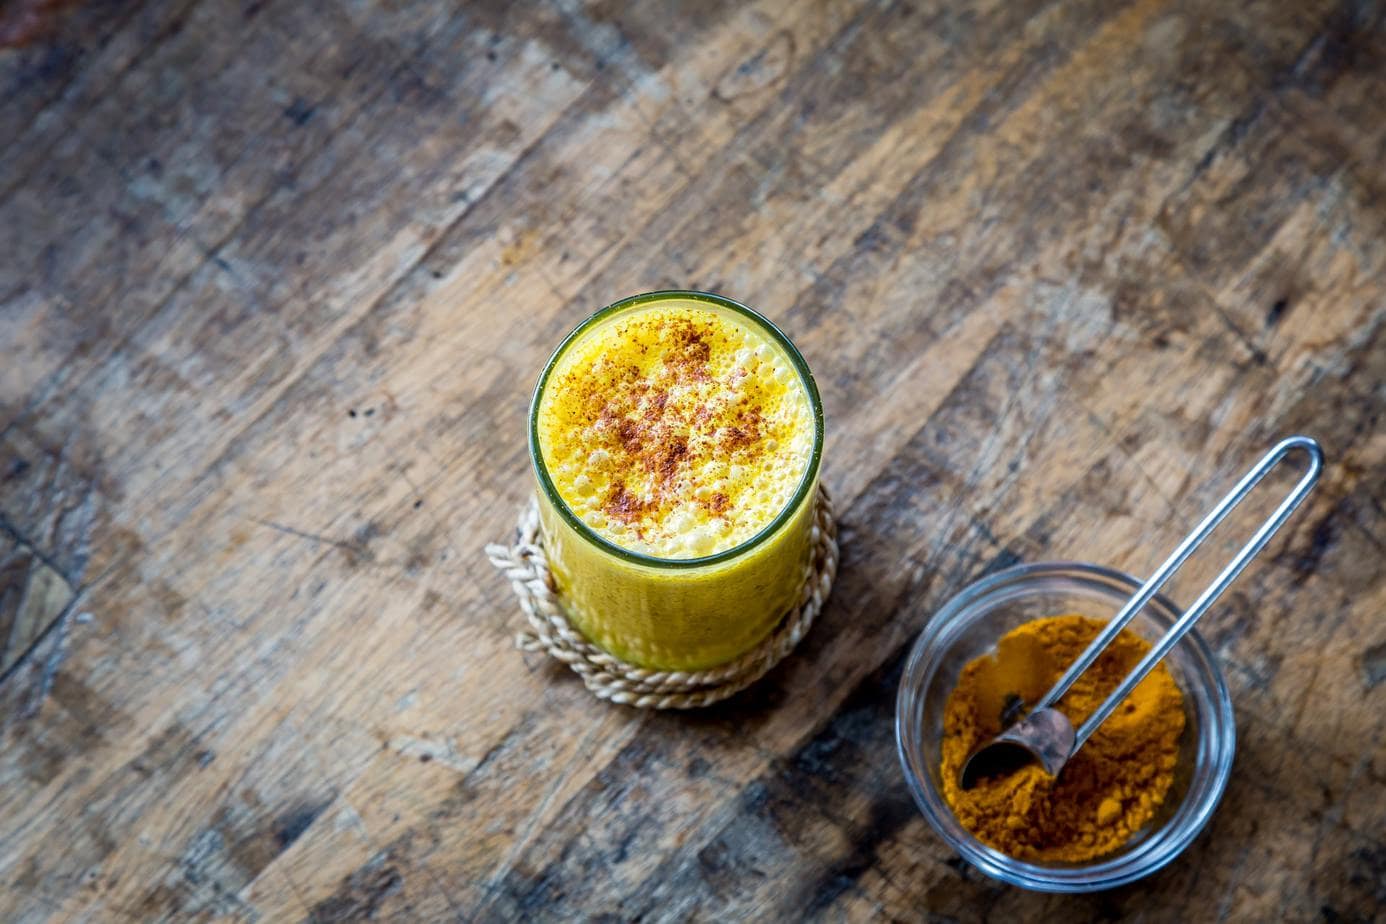 Golden milk for health and beauty – what is it and how does it work?